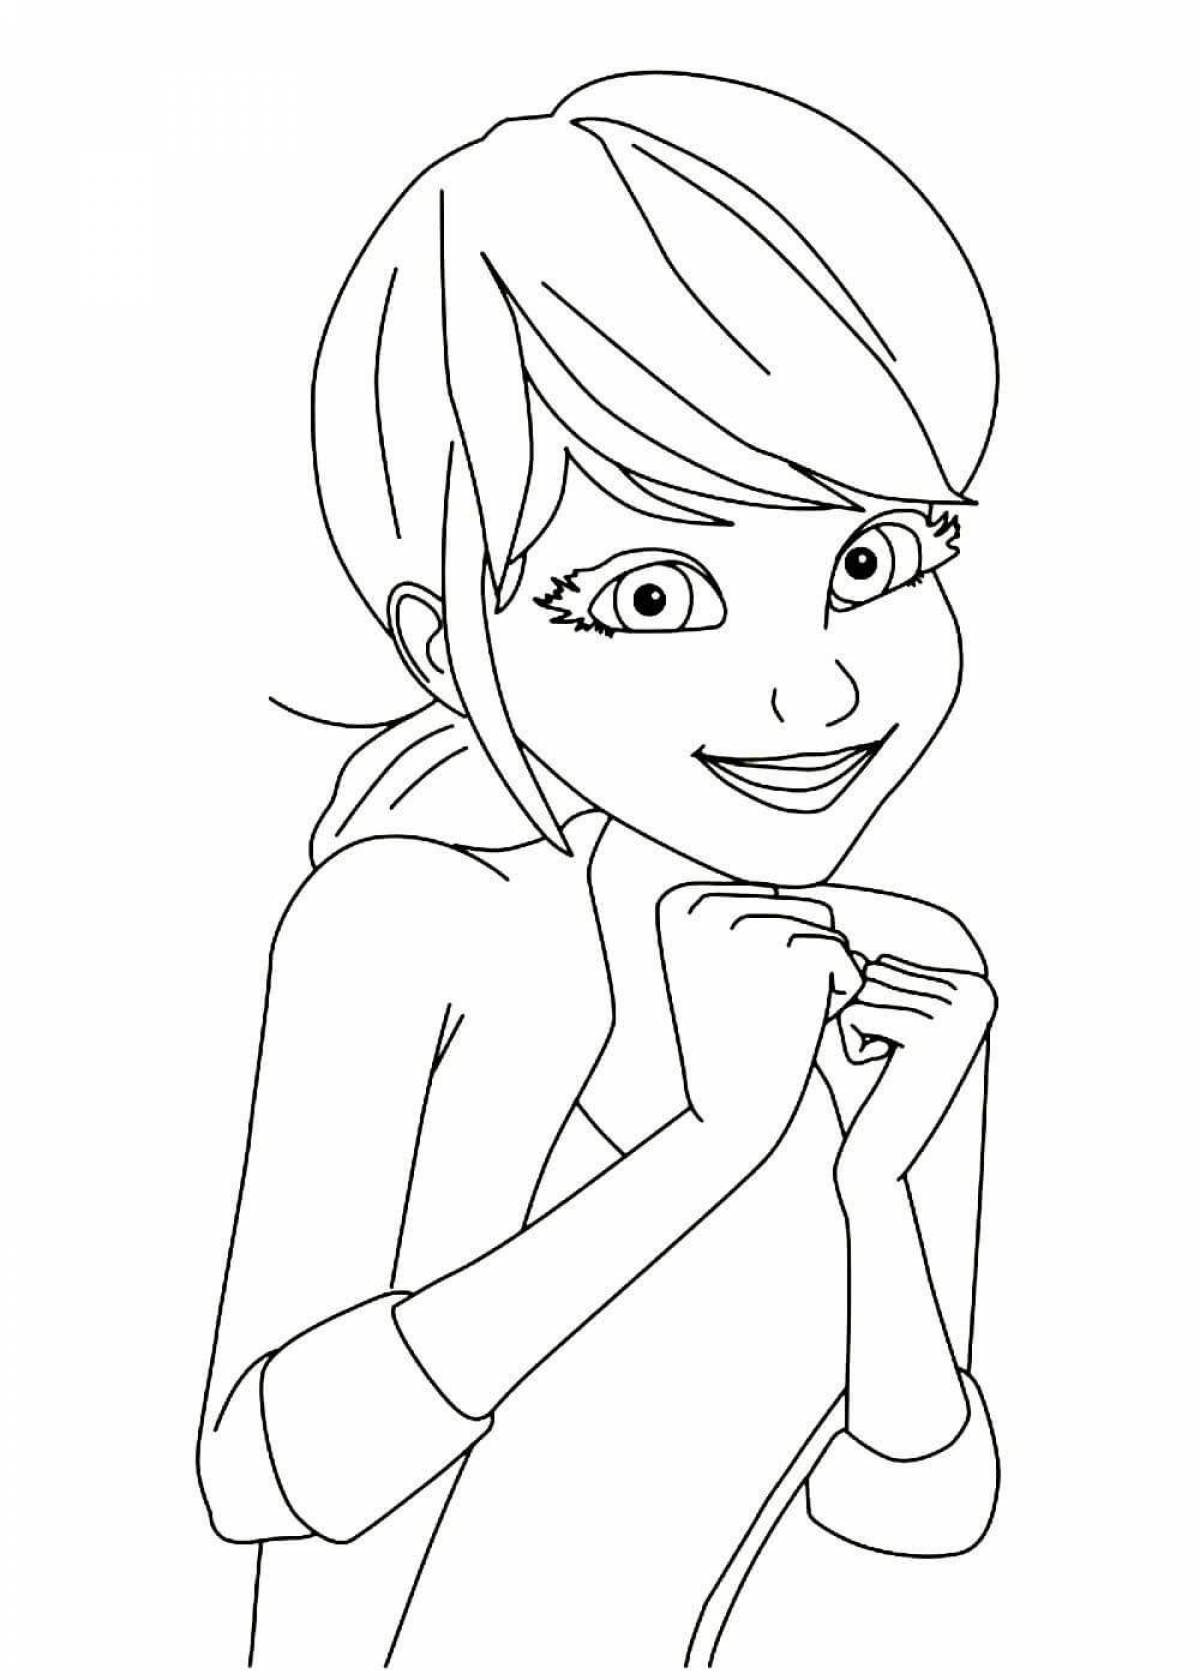 Marinette sparkling coloring page